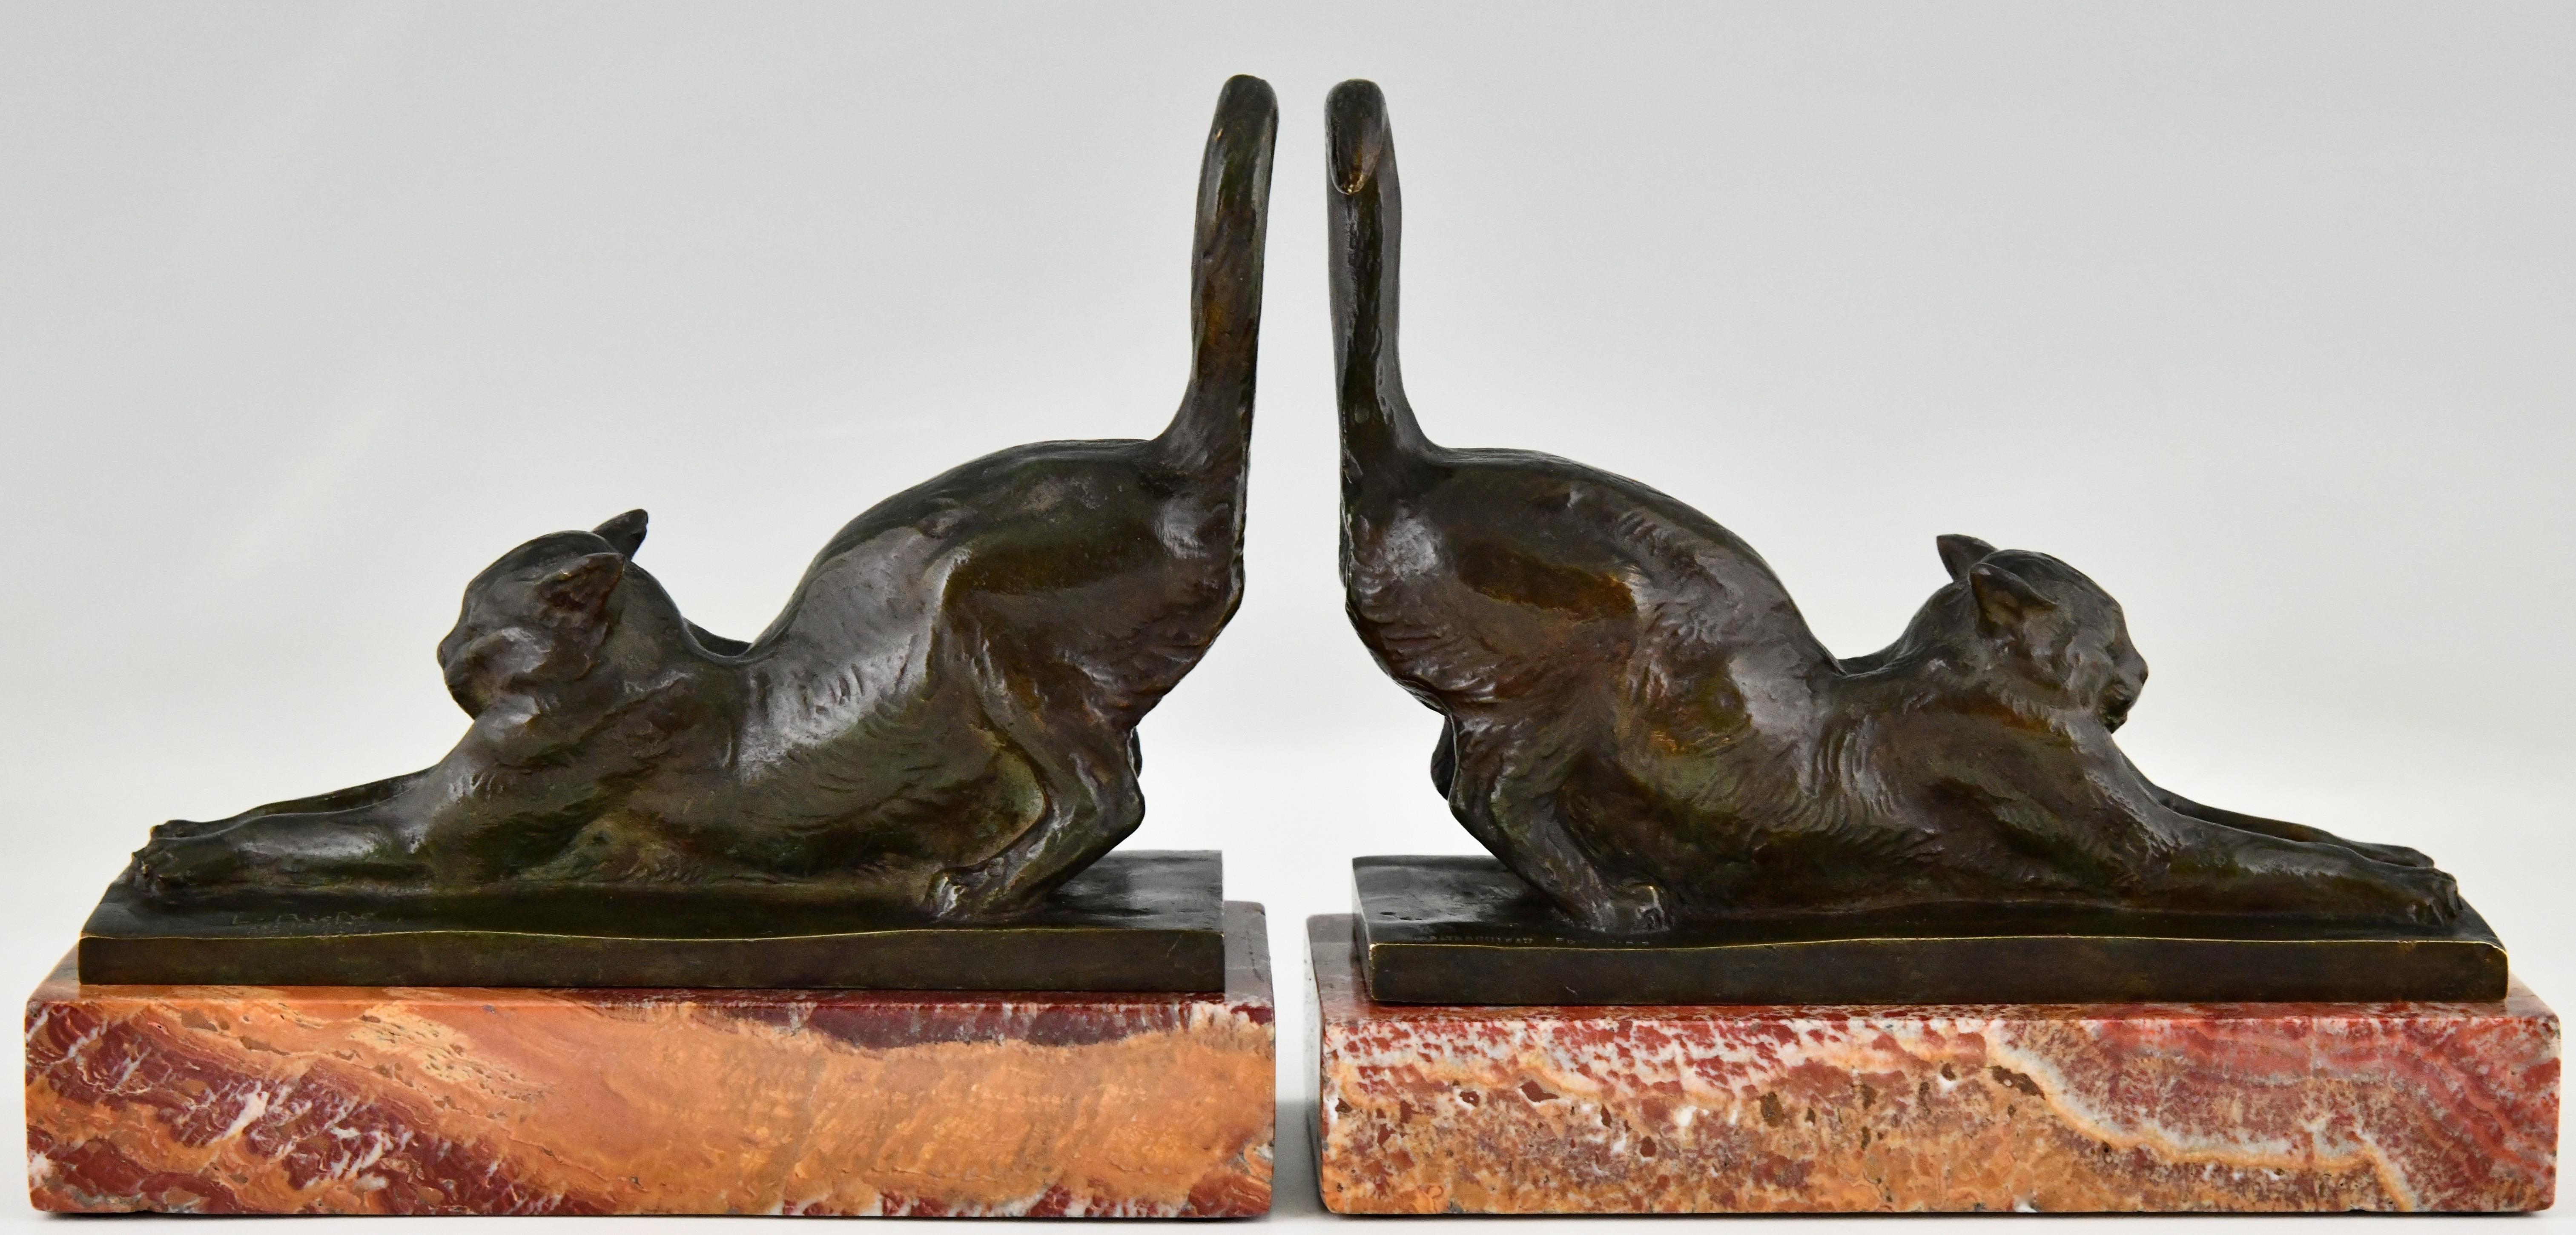 Very beautiful pair of Art Deco bronze bookends with stretching cats on a black marble base. The pair is signed by Louis Riche (1877-1949), a famous French animalier who specialized in cat sculptures.
Signed, Foundry mark Patrouilleau and marked